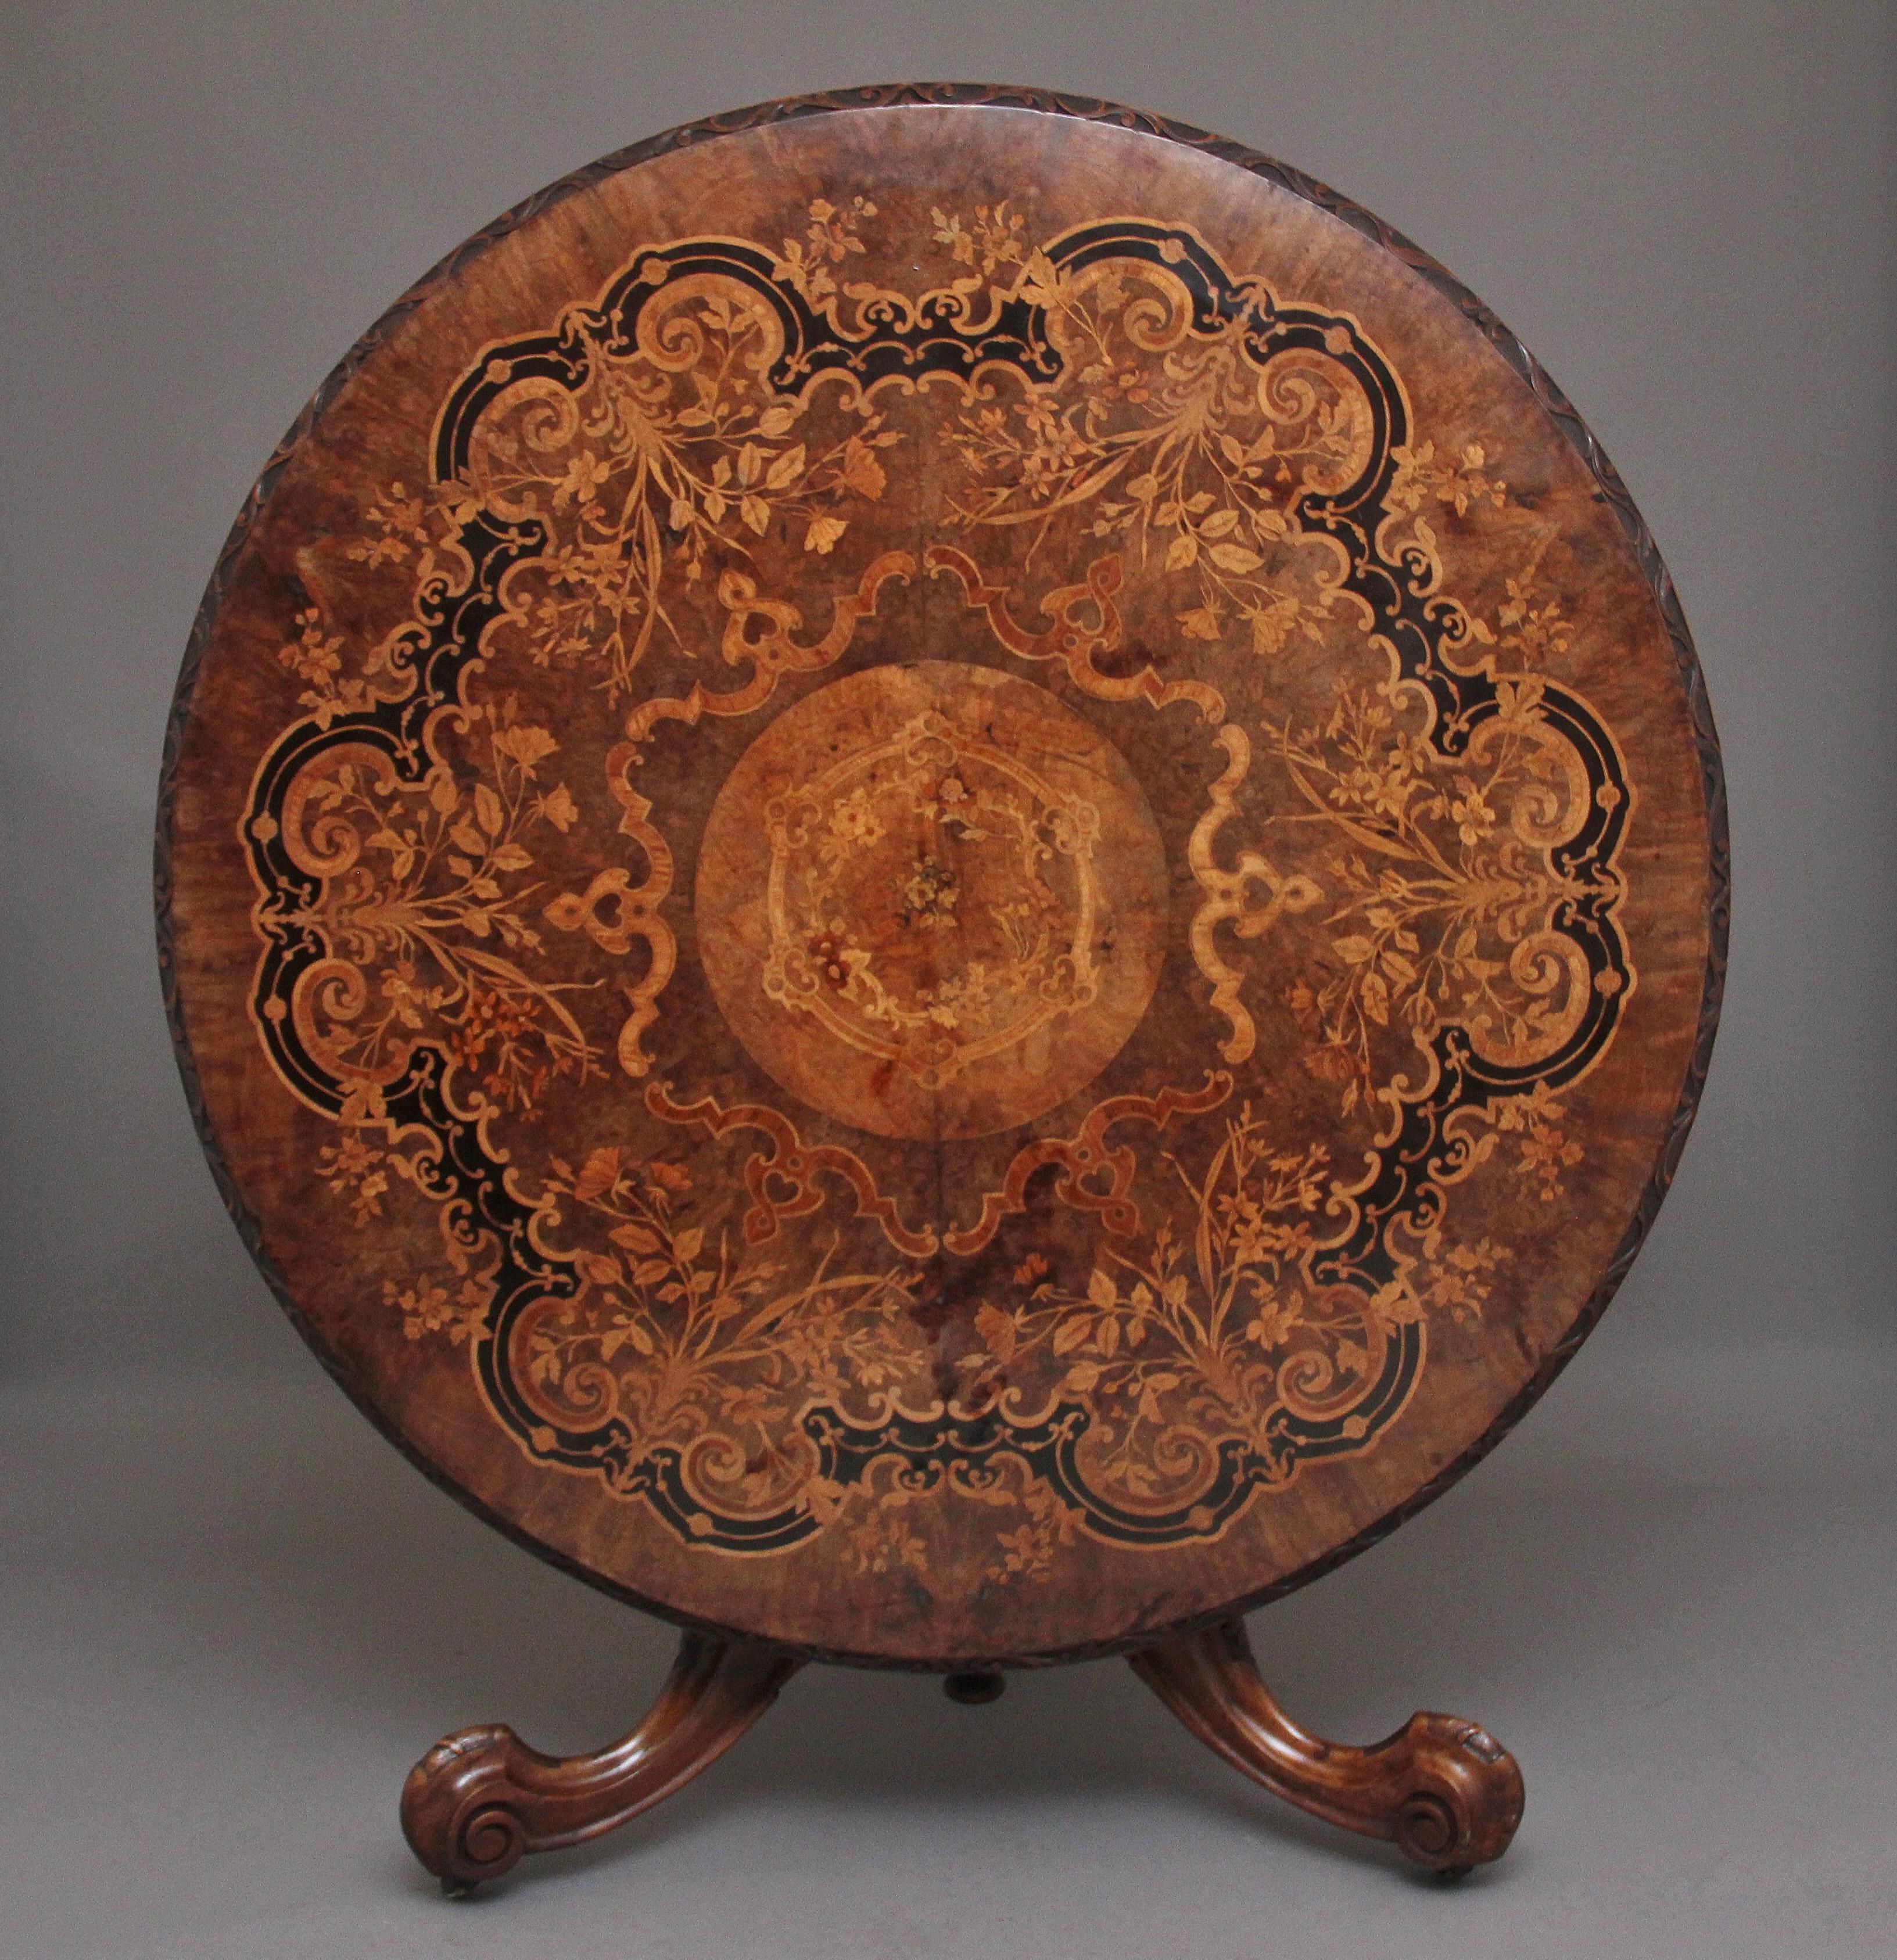 An exhibition quality 19th century walnut and marquetry centre / breakfast table, the circular top having a decorative foliate carved edge, profusely inlaid with exotic specimen timbers with flowers and foliage and fabulously inlaid at the centre,